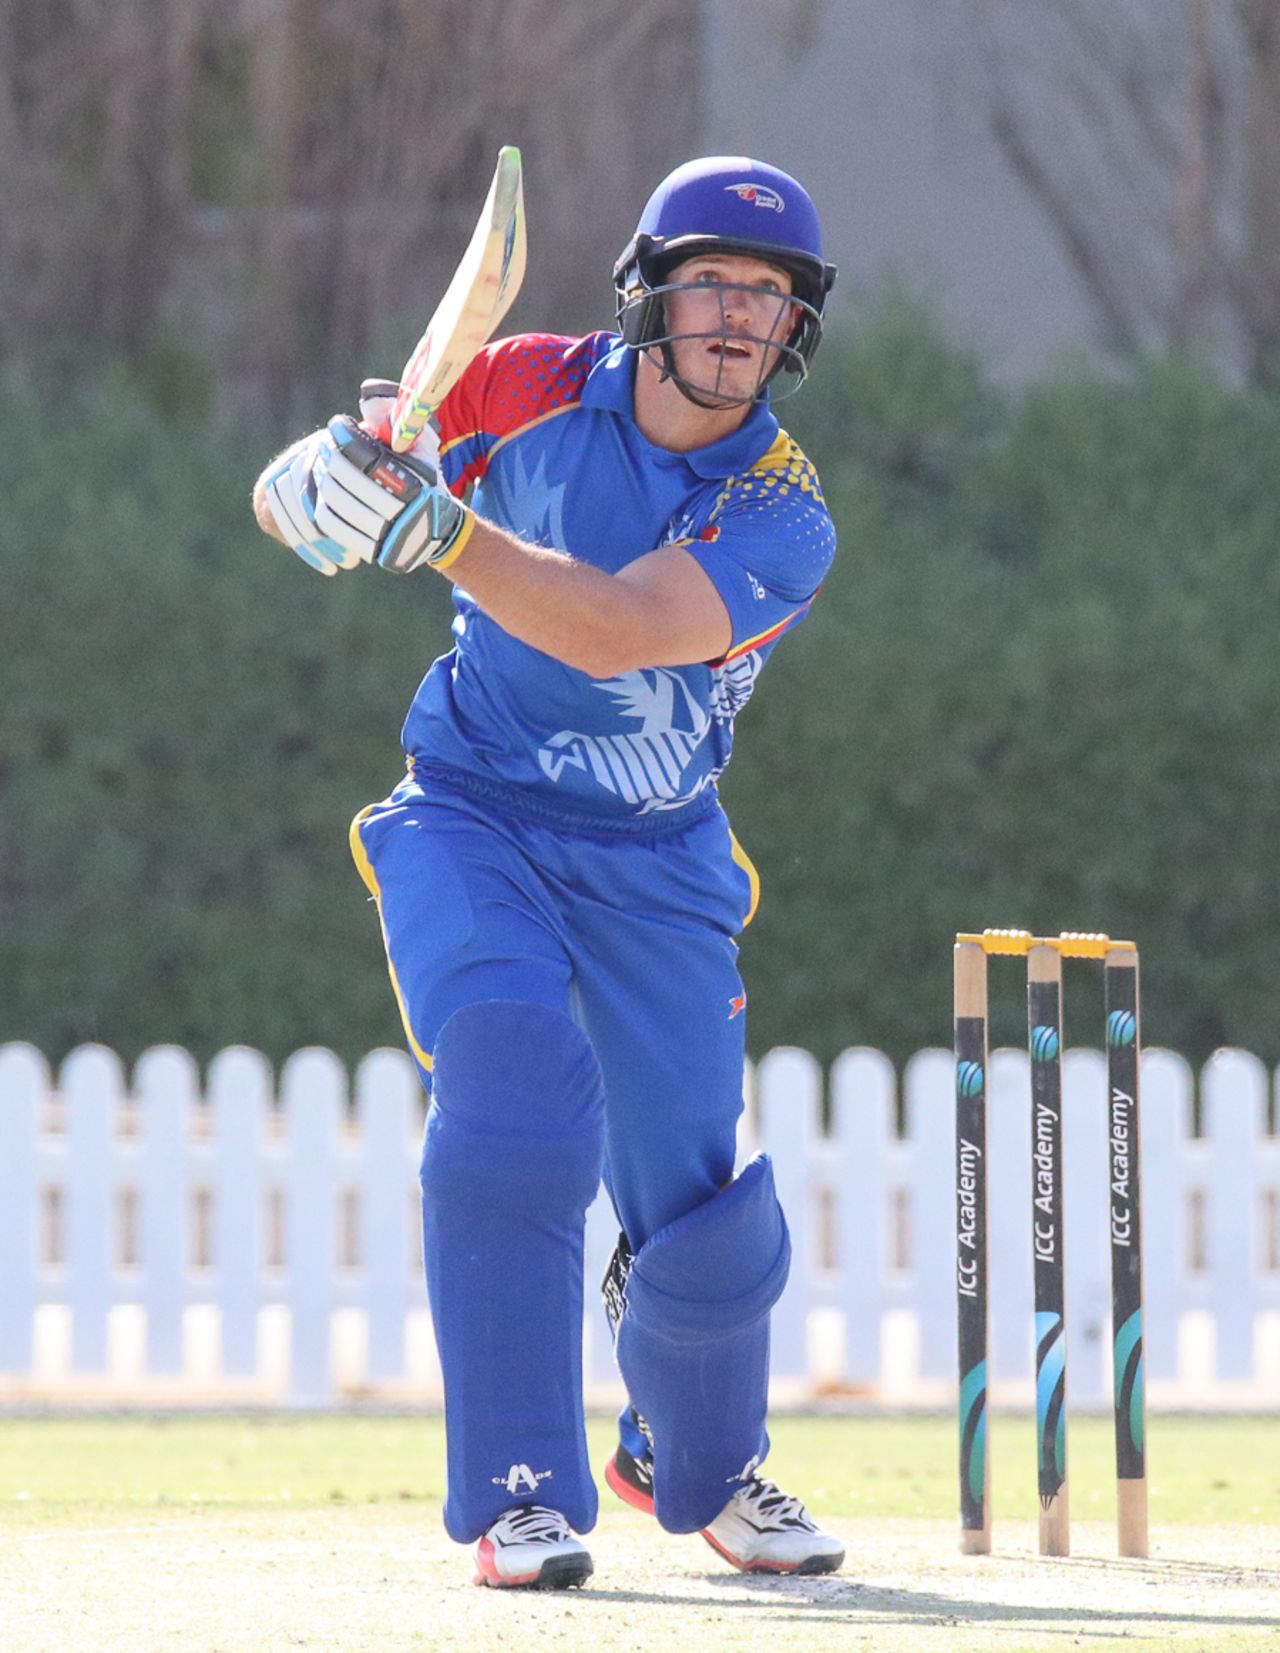 Louis van der Westhuizen strikes a pose after driving a six over mid-off, Namibia v Netherlands, 2015-17 WCL Championship, Dubai, December 6, 2017